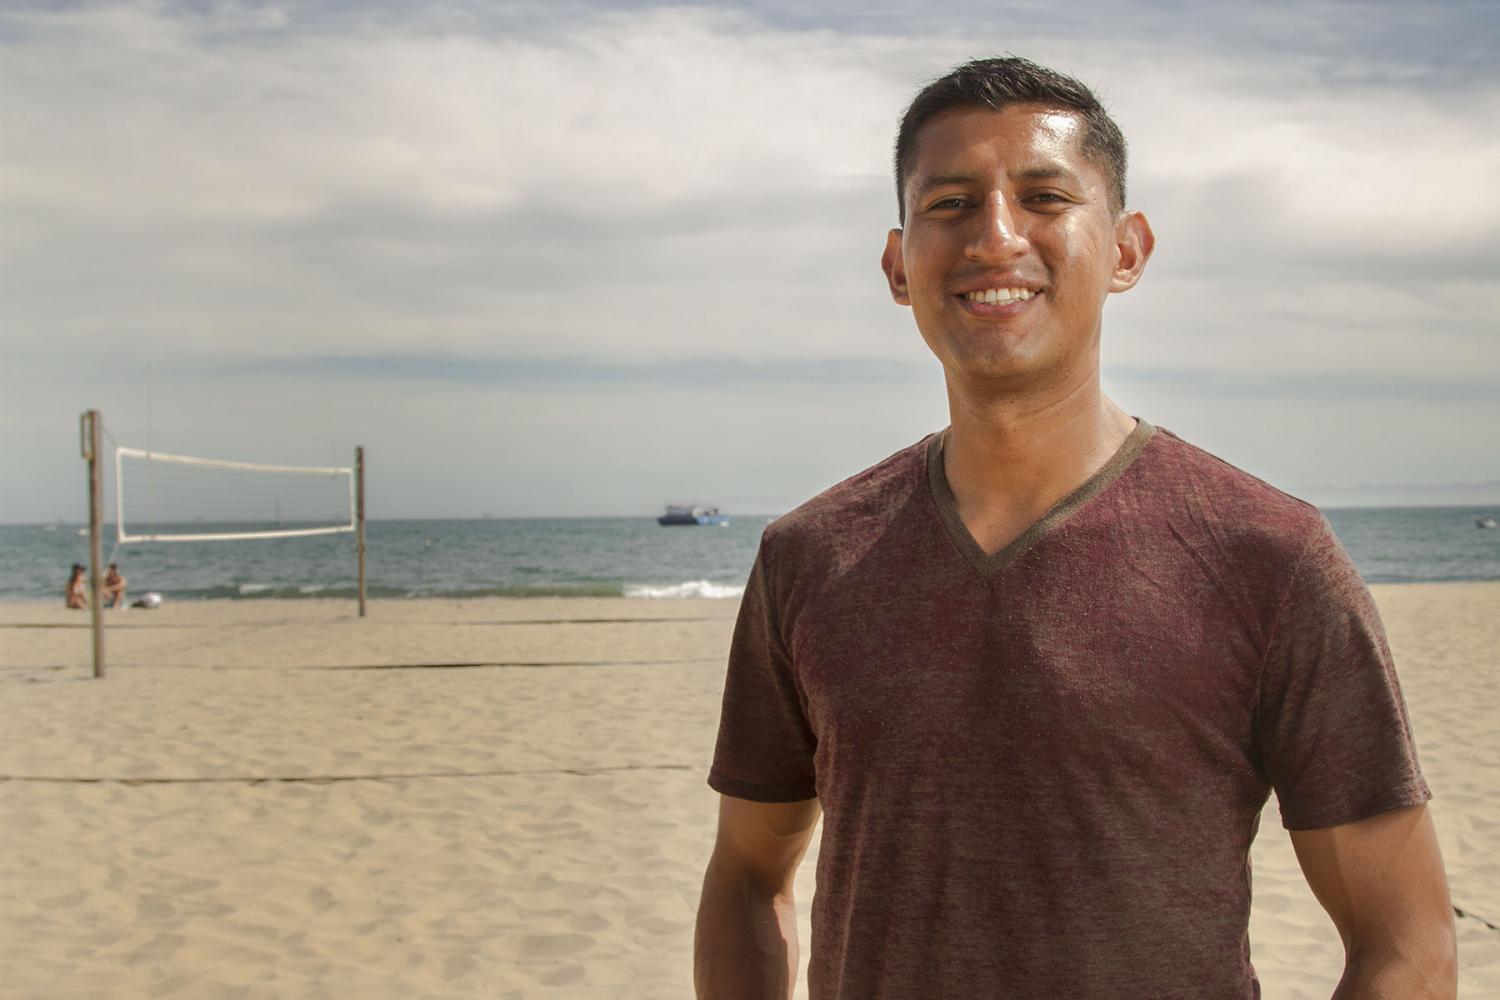 Hugo Martinez, City College American Sign Language tutor, on Thursday, April 27, at Santa Barbara East Beach. Martinez was selected for the USA Men’s Deaf Volleyball team for the 2017 Deaflympics in Samsun, Turkey.